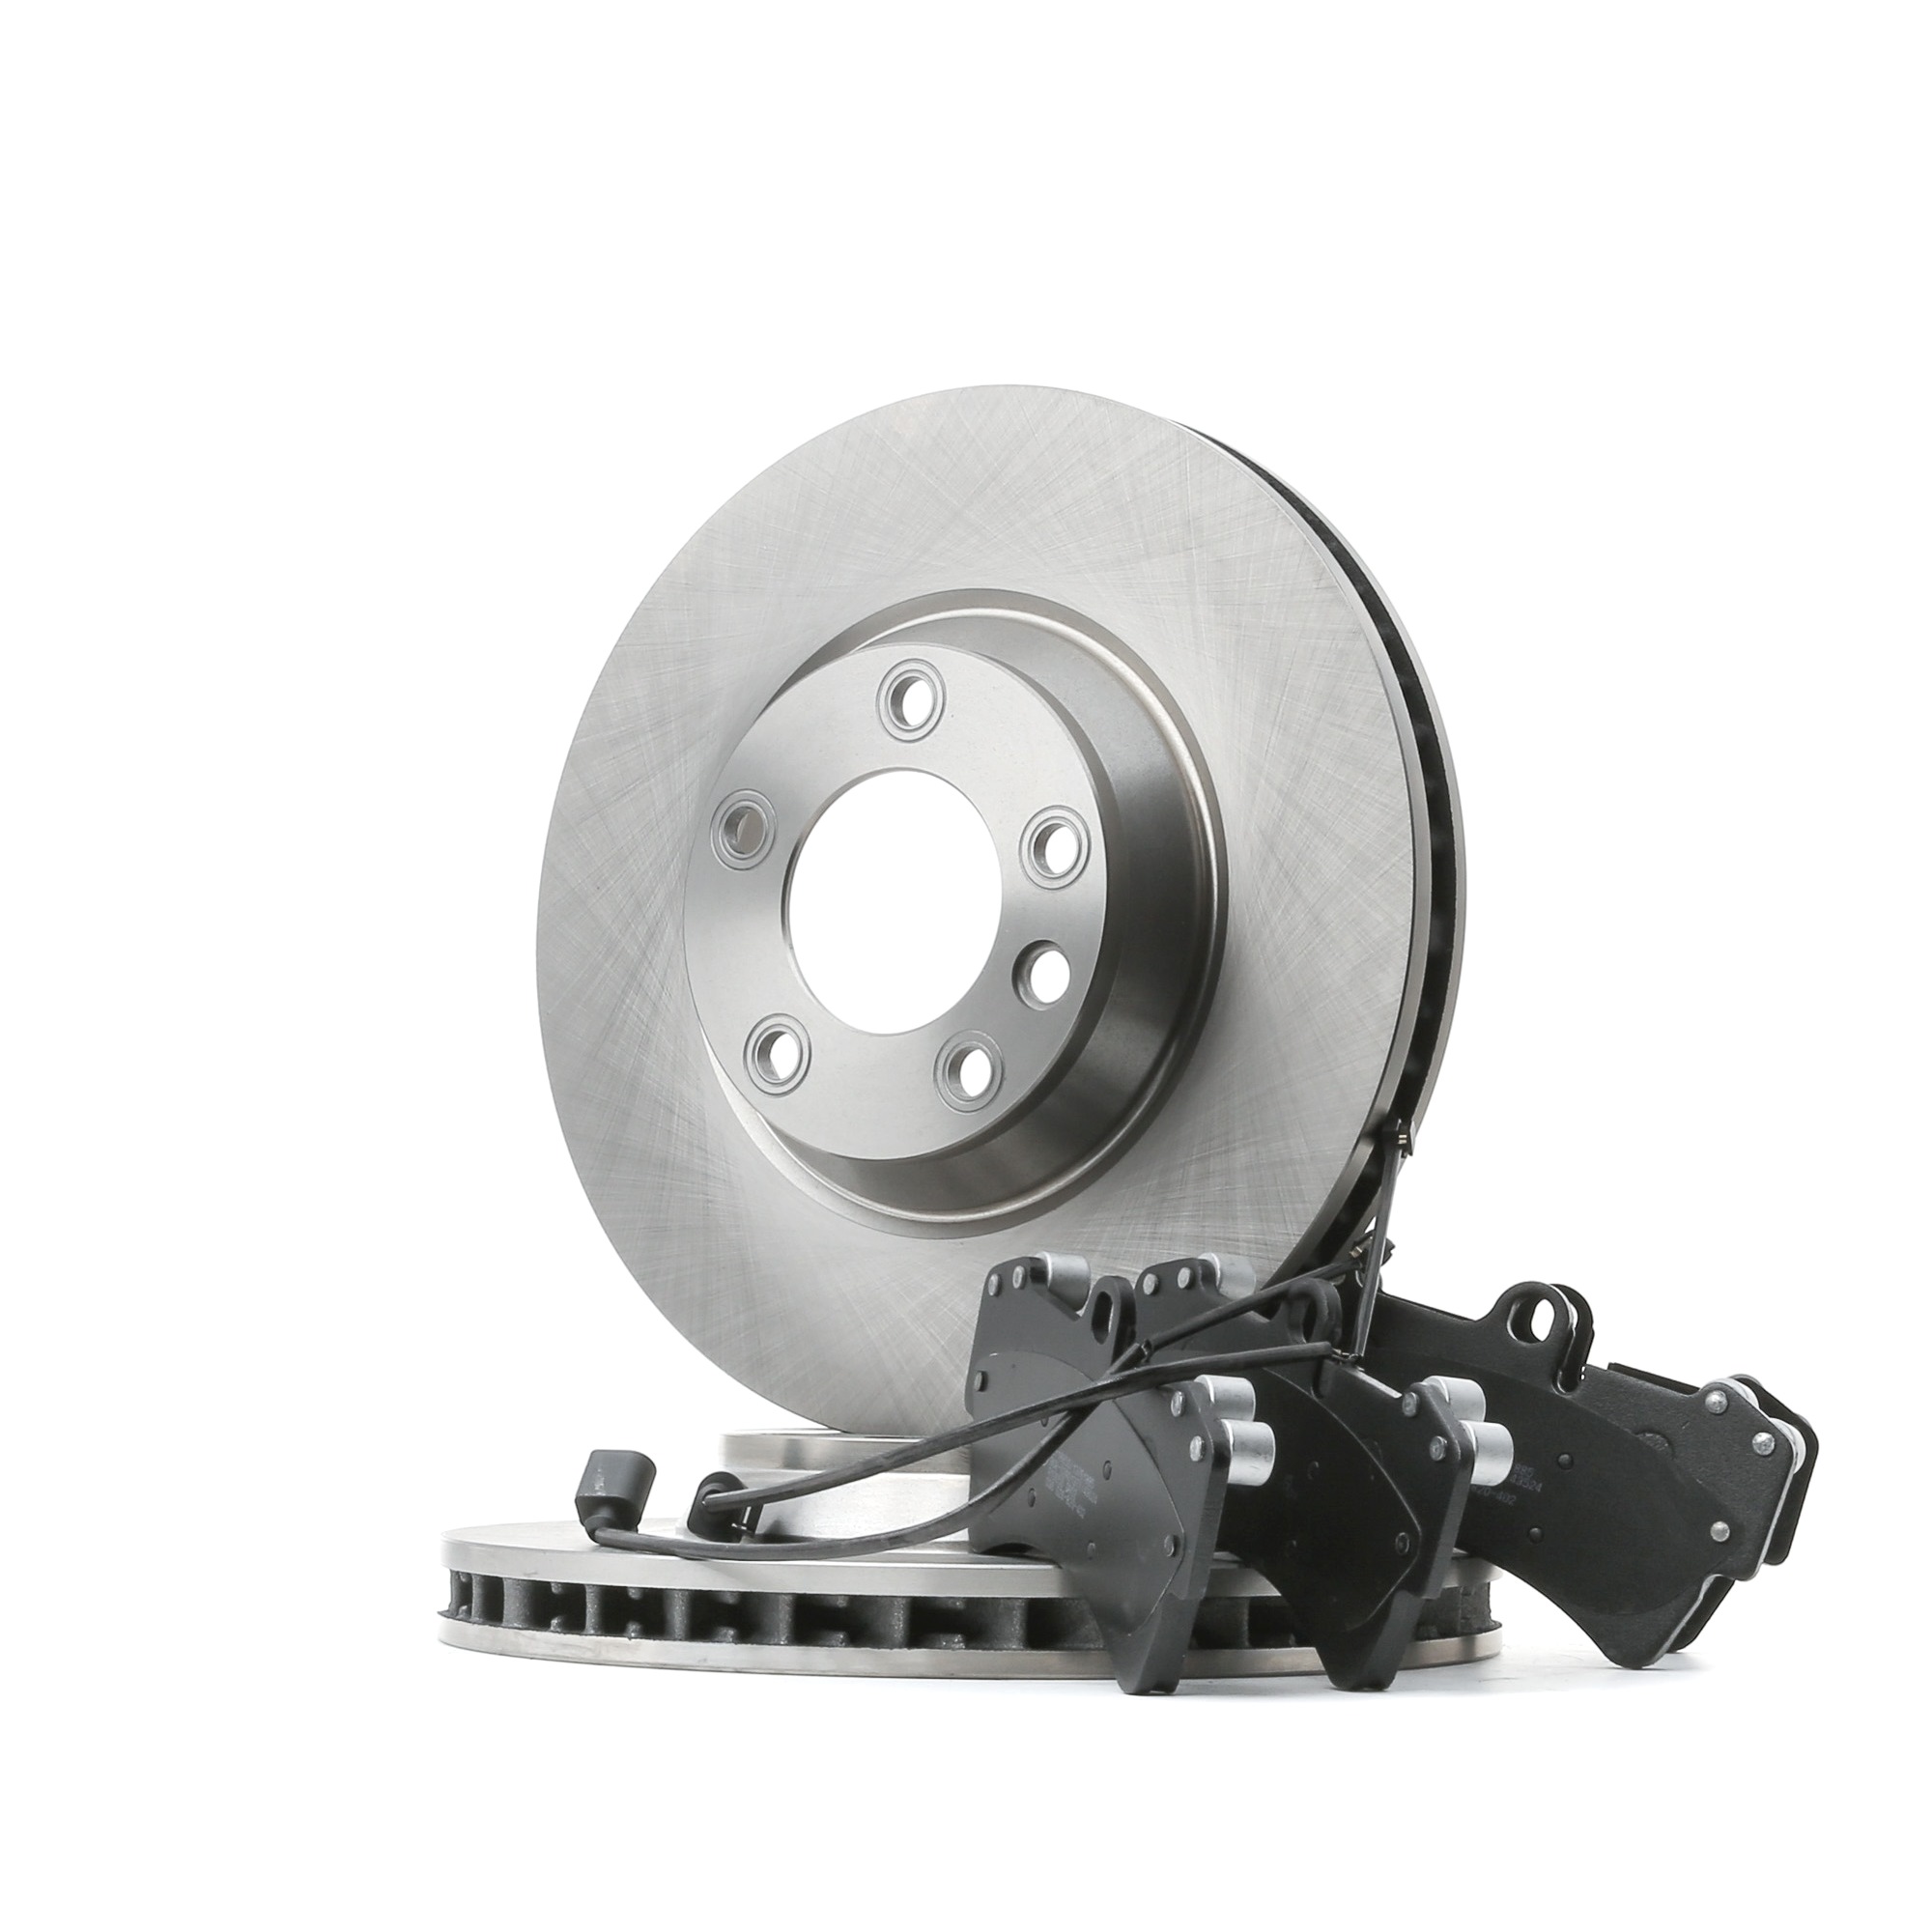 STARK SKBK-1090365 Brake discs and pads set Front Axle, Vented, with anti-squeak plate, prepared for wear indicator